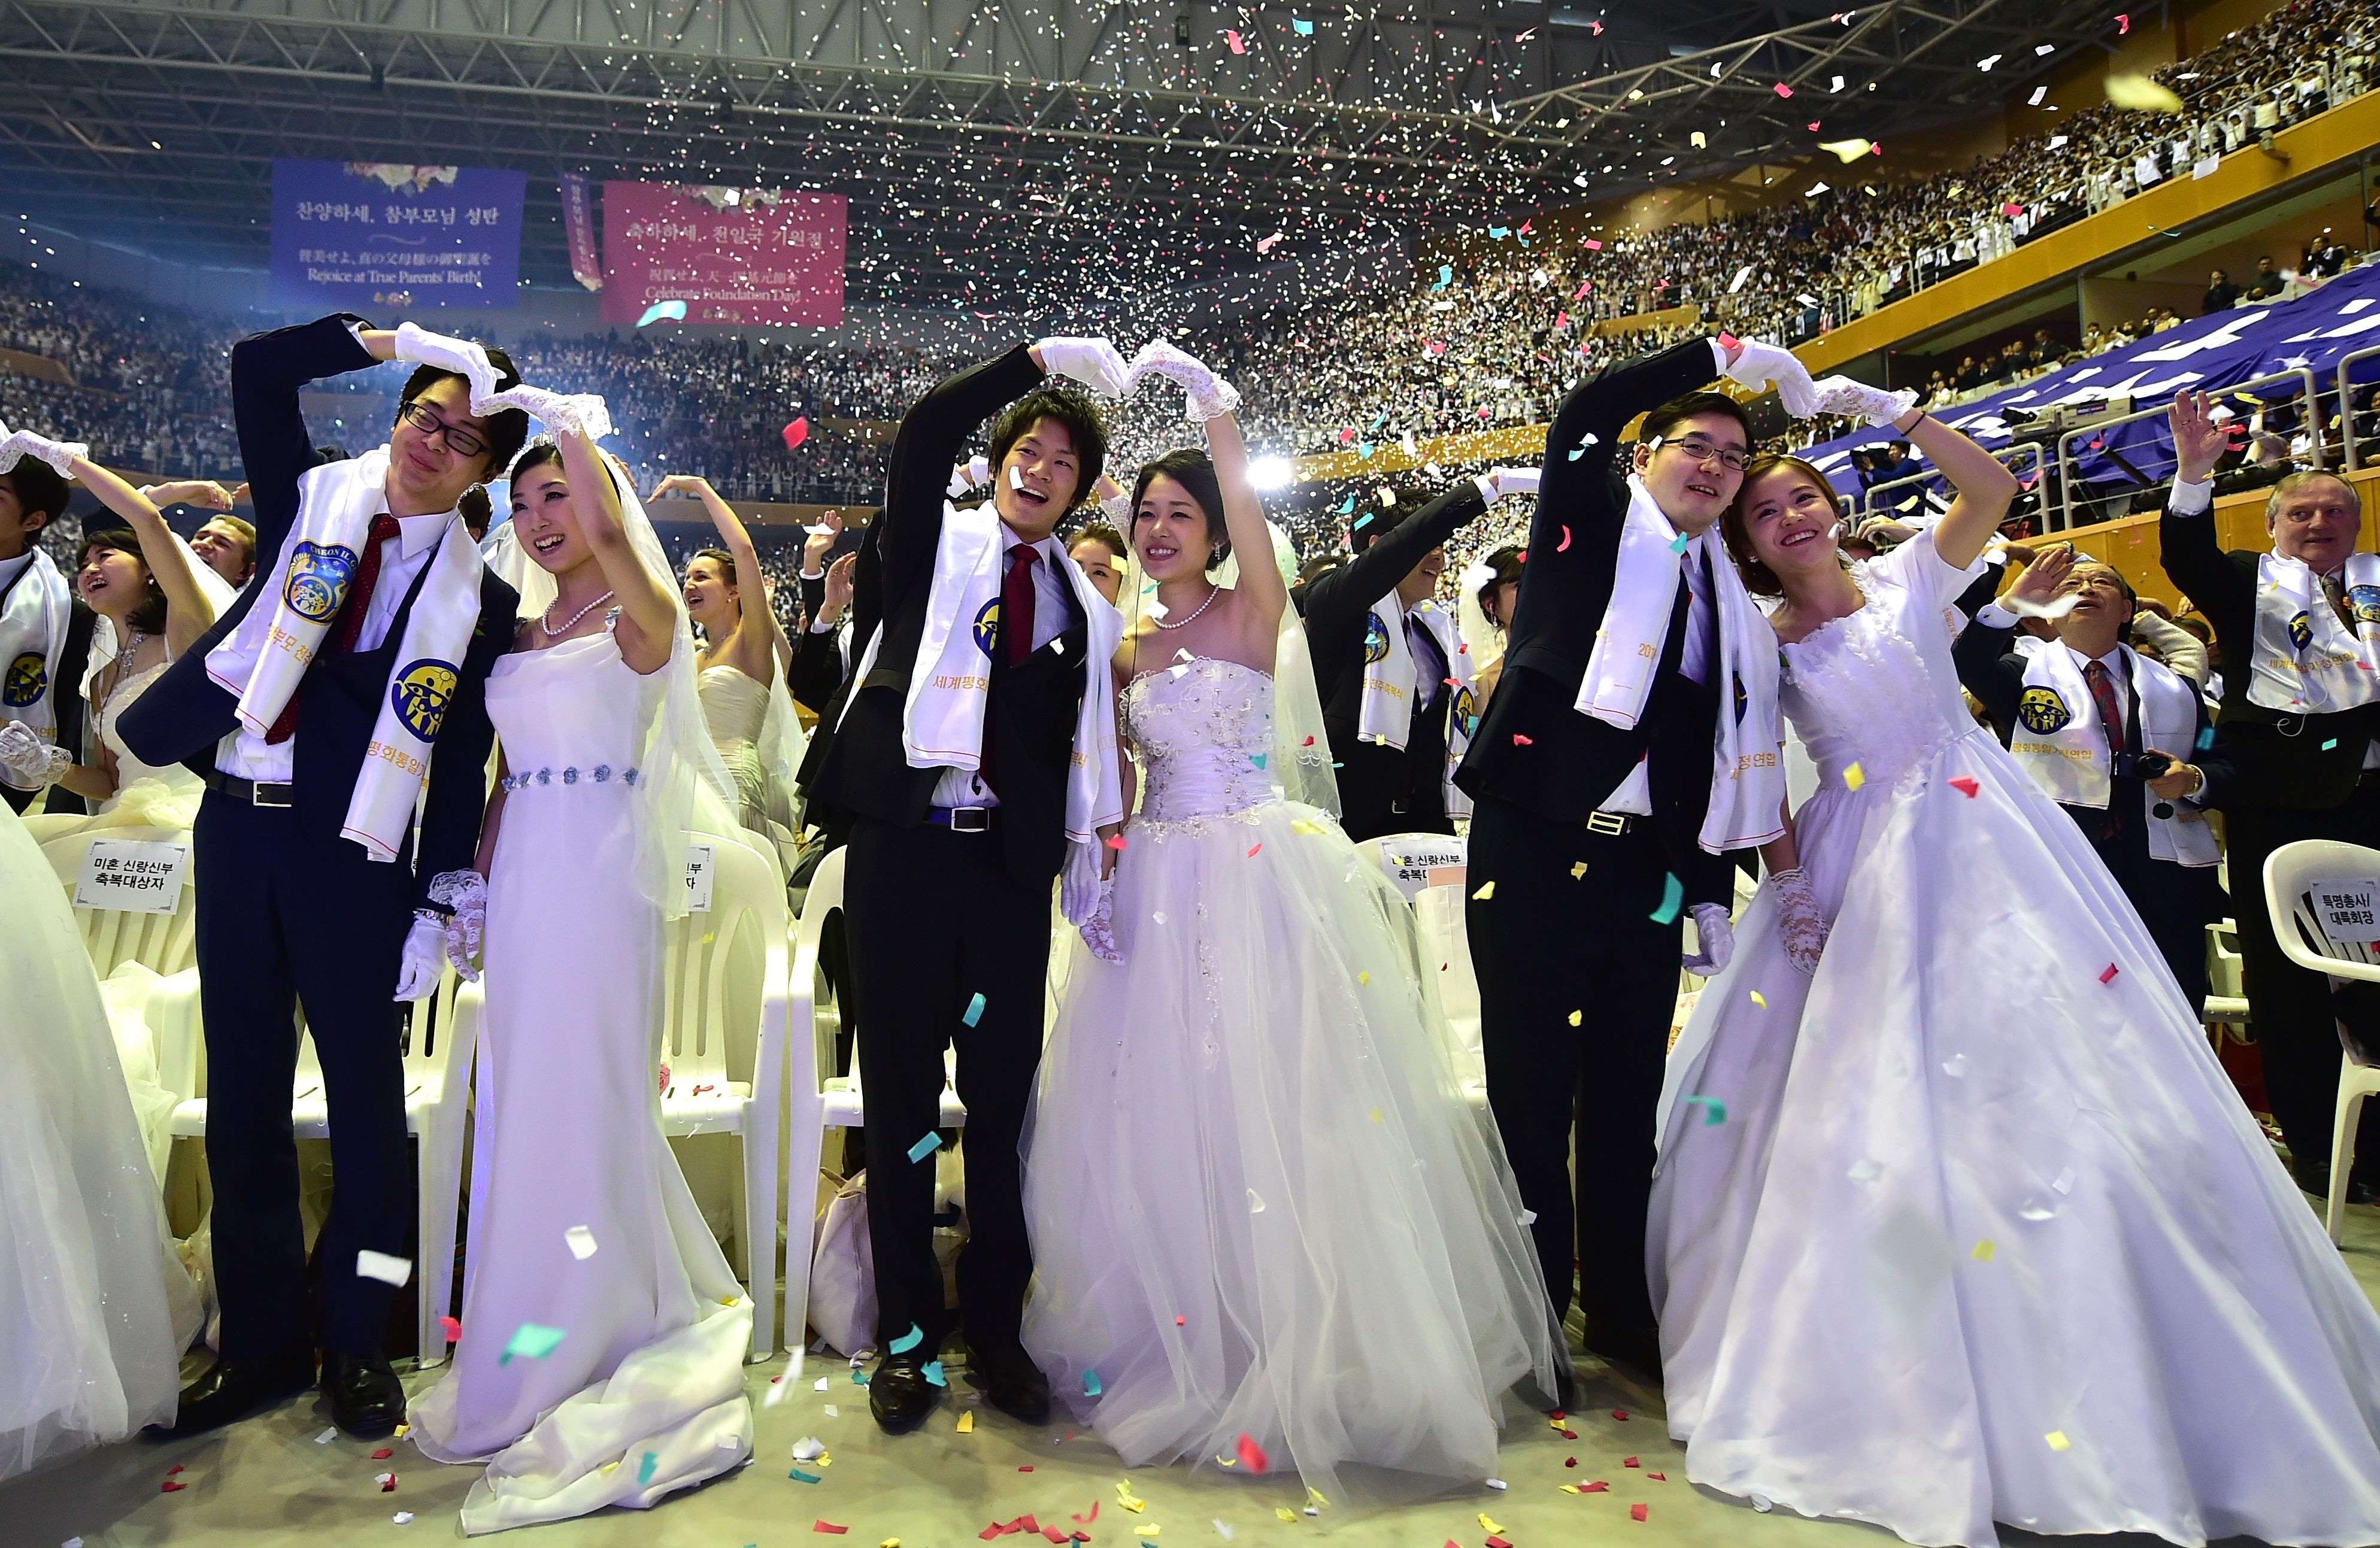 Couples celebrate during a mass wedding held by the Unification Church at Cheongshim Peace World Center in Gapyeong, east of Seoul, on February 20, 2016. Hundreds of couples were married at the South Korean headquarters of the Unification Church. The Unification Church, set up by Sun Myung Moon in Seoul in 1954, is one of the world's most controversial religious organisations, and its devotees are often dubbed "Moonies" after the founder. AFP PHOTO / JUNG YEON-JE SKOREA--RELIGION-UNIFICATION-MARRIAGE